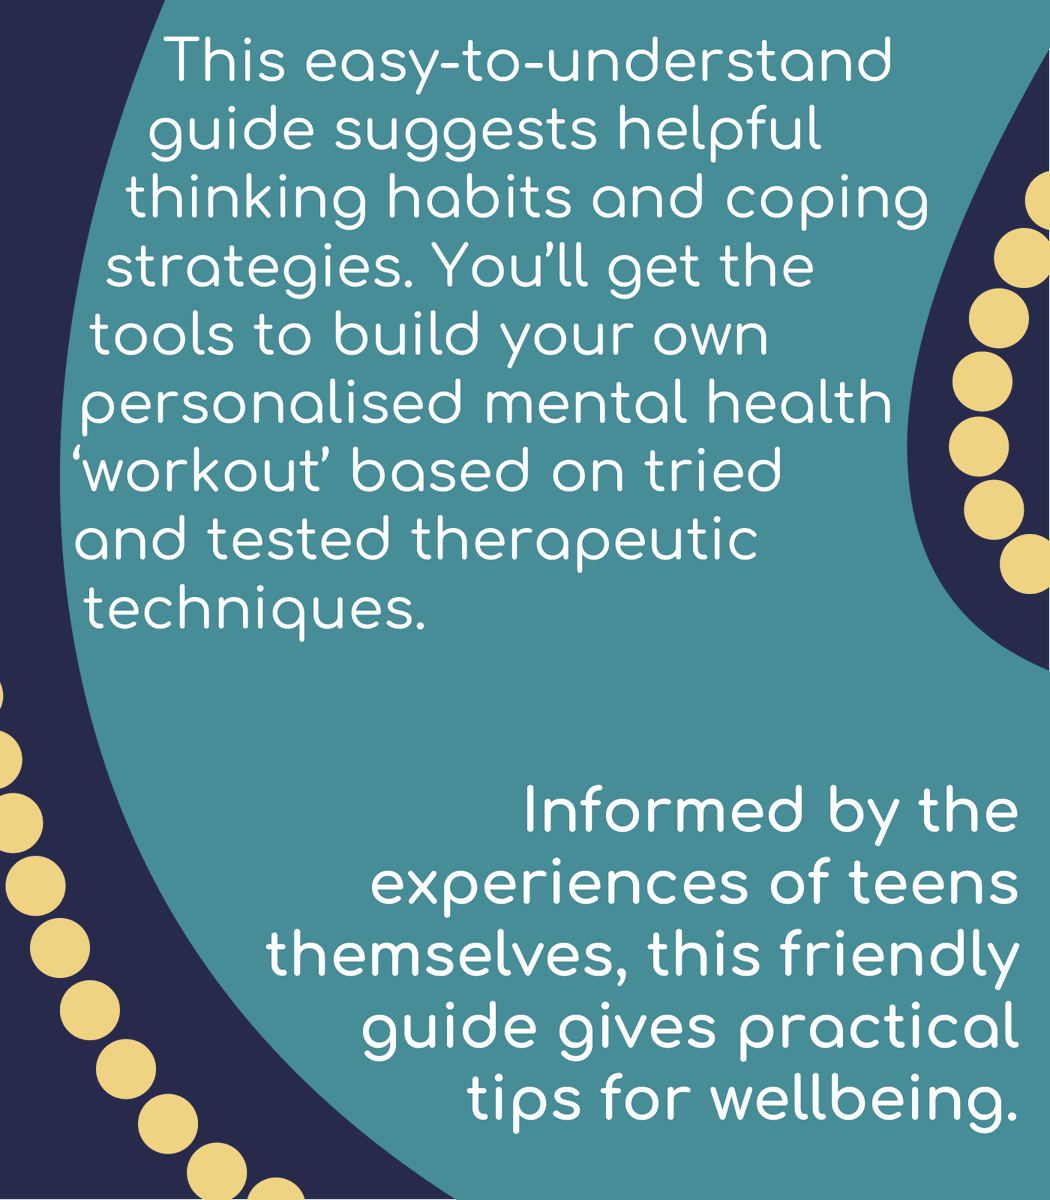 This #MentalHealthAwarenessWeek, we’re supporting young people to access tools and information that help their wellbeing, including telling them about books they can access for free through their local libraries. Find out more: bit.ly/MHBooksTeens